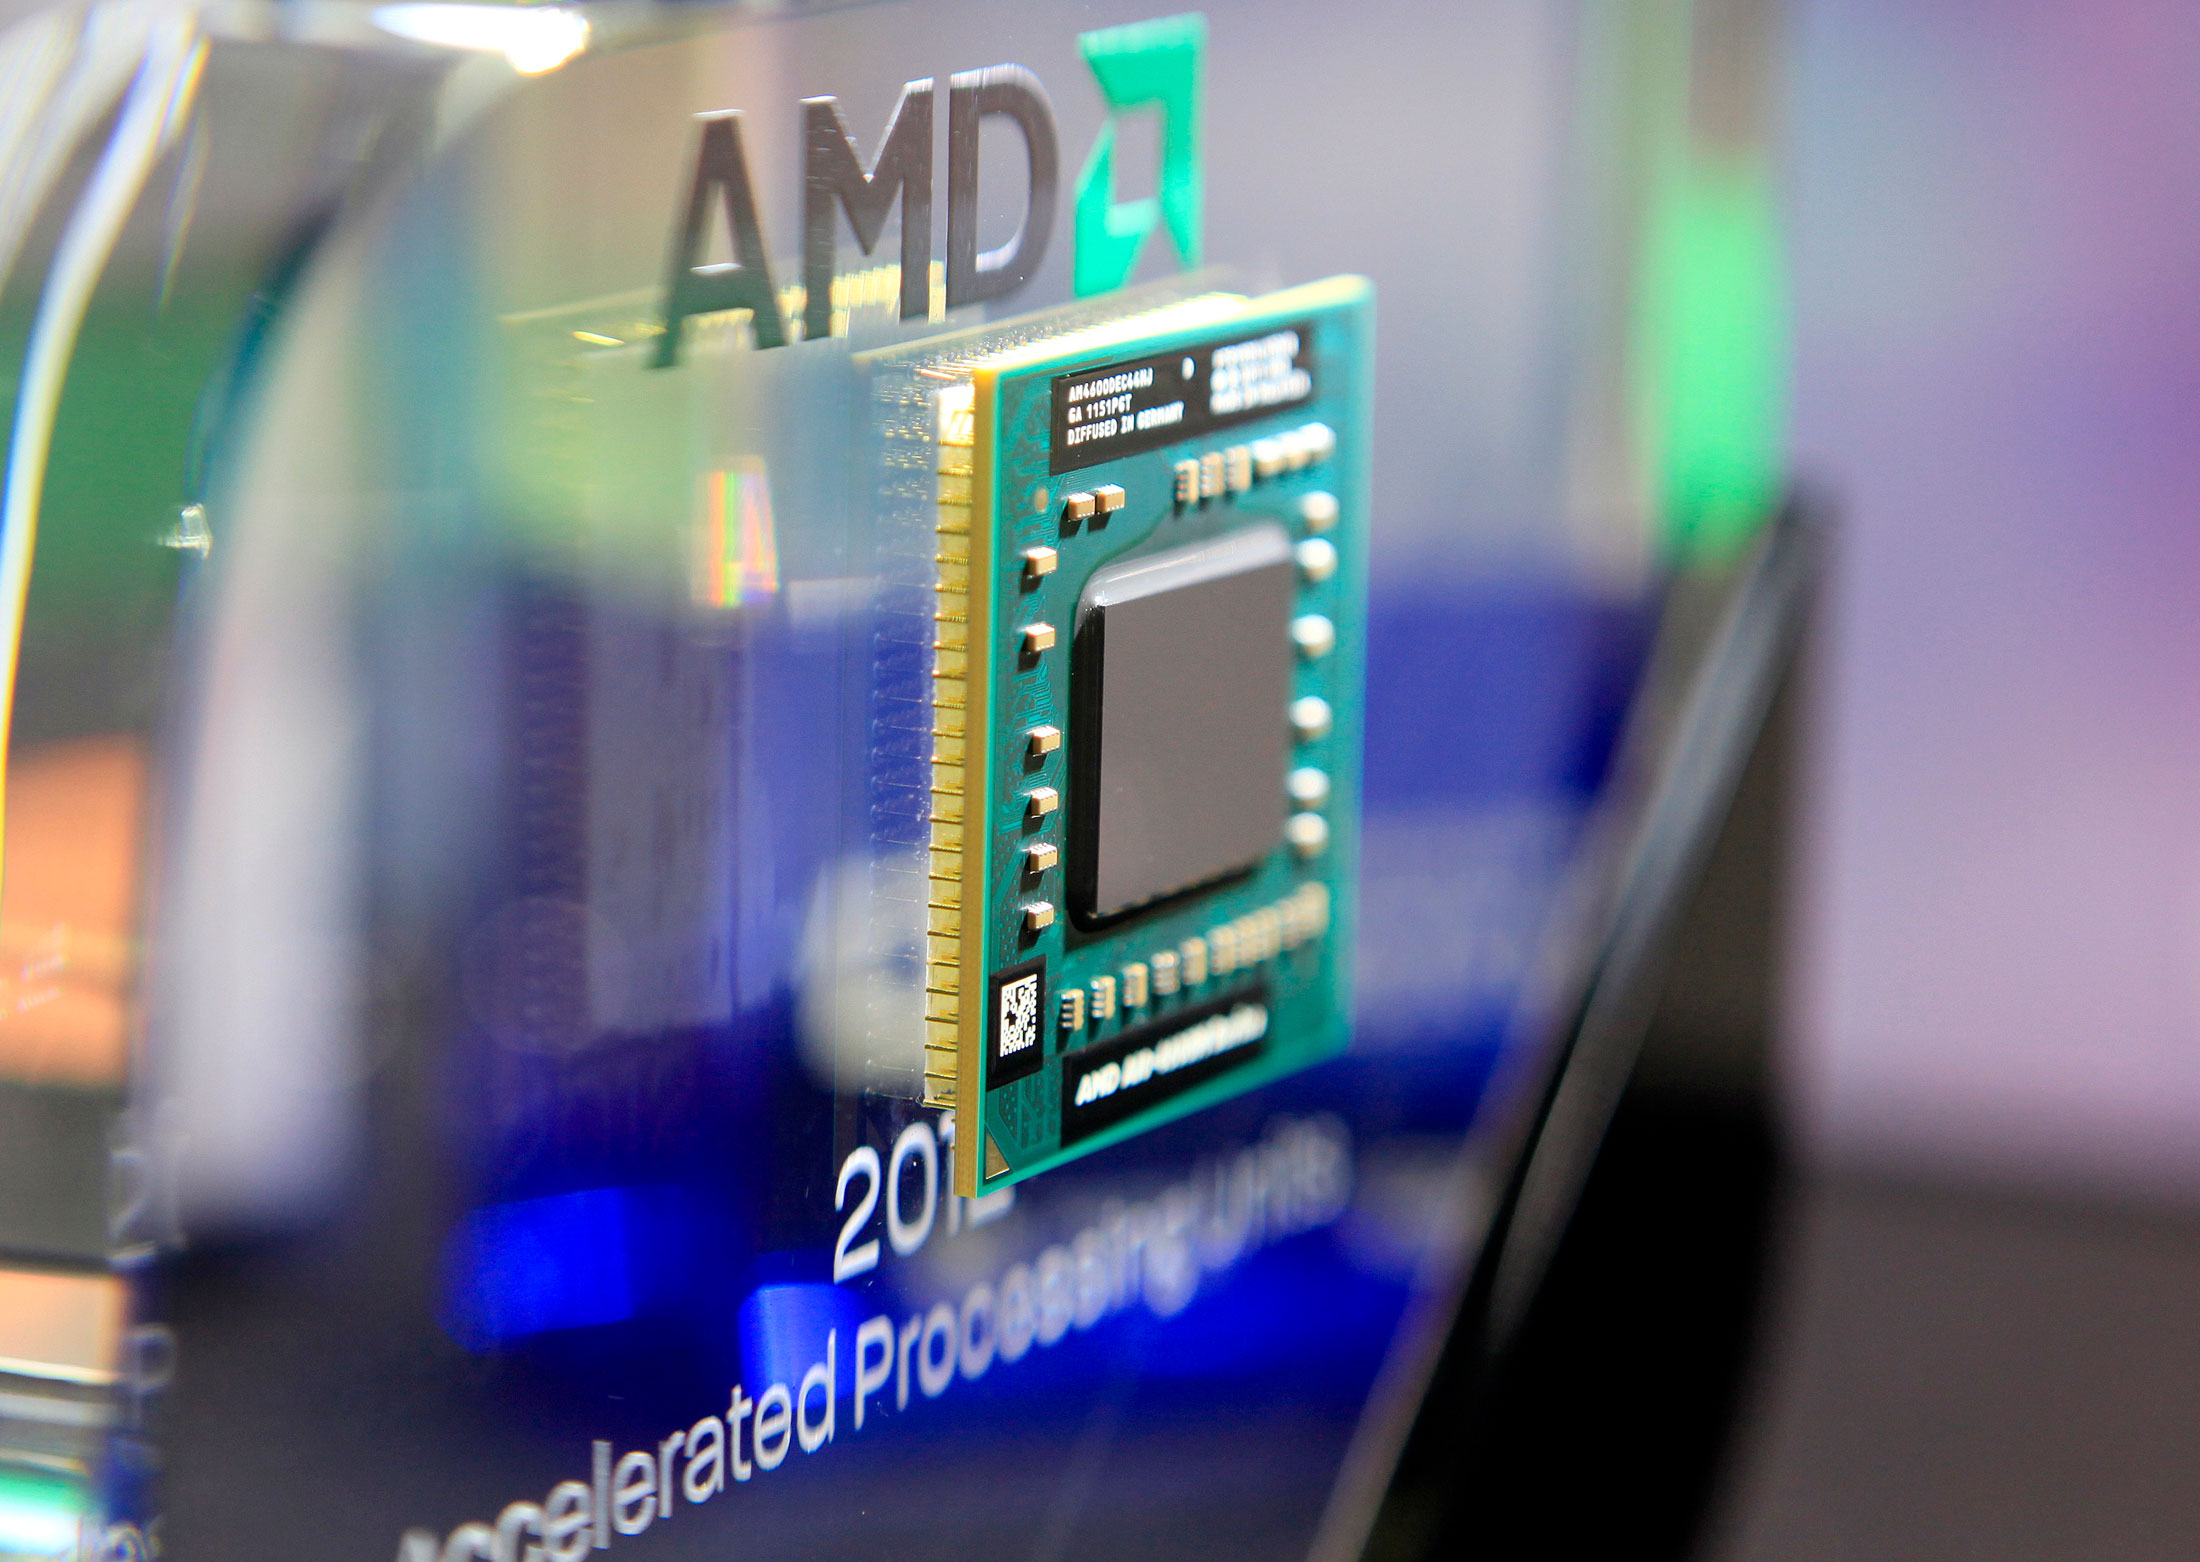 Advanced Micro Devices Inc. tumbled 13 percent in early New York trading after the chipmaker said second-quarter sales declined more than it had originally projected, citing weak consumer demand for personal computers.
